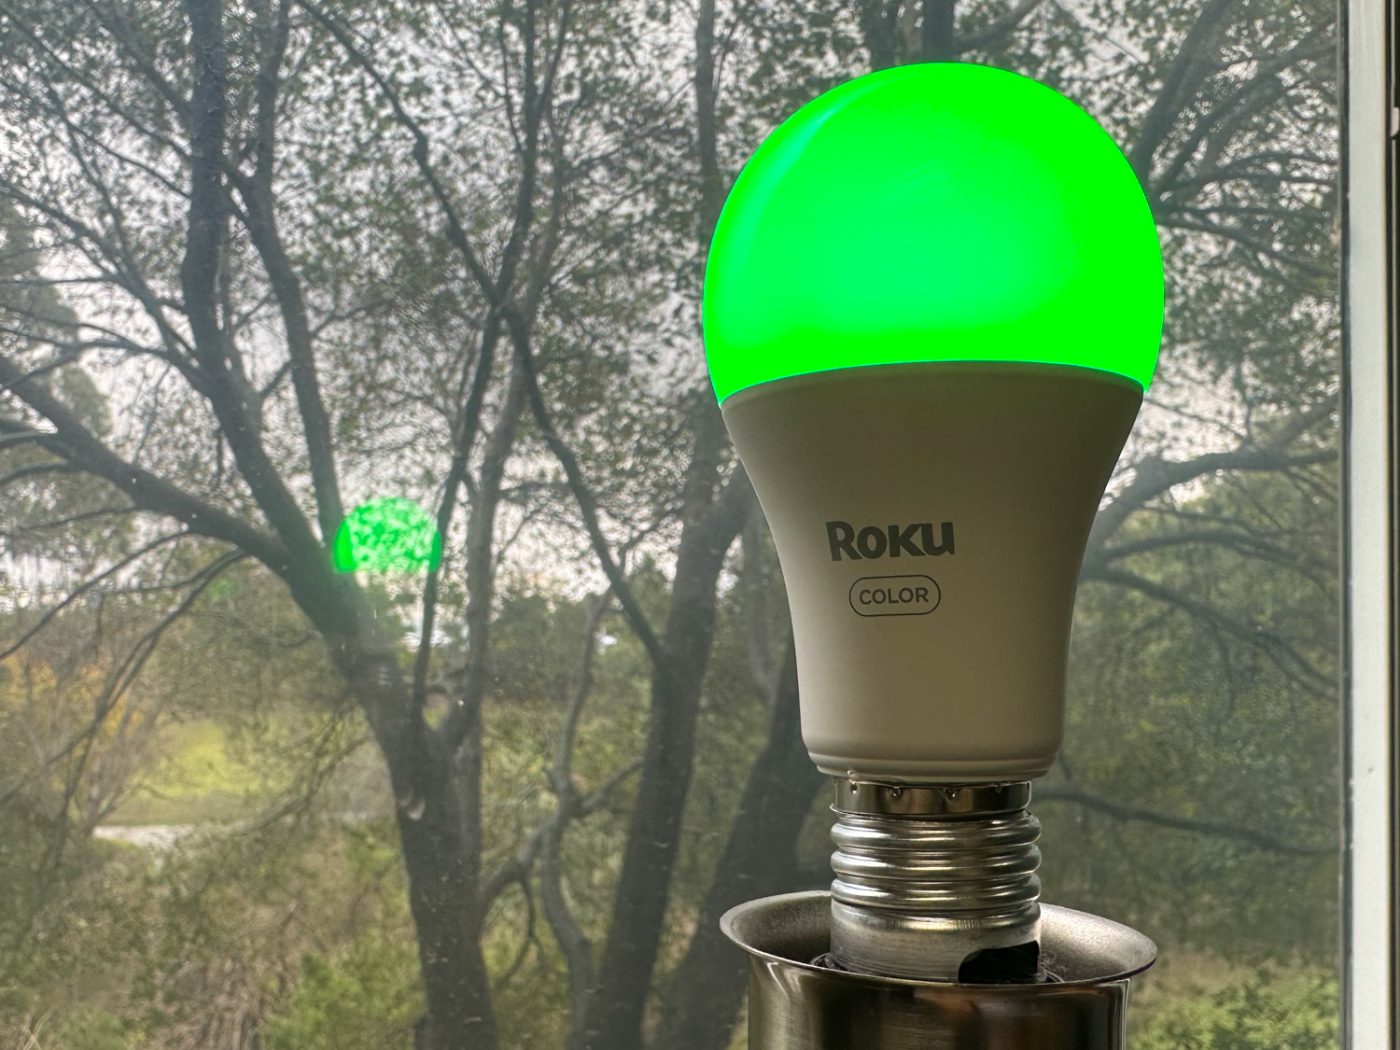 Roku Smart Bulb SE review: A decent bulb that works best with Roku